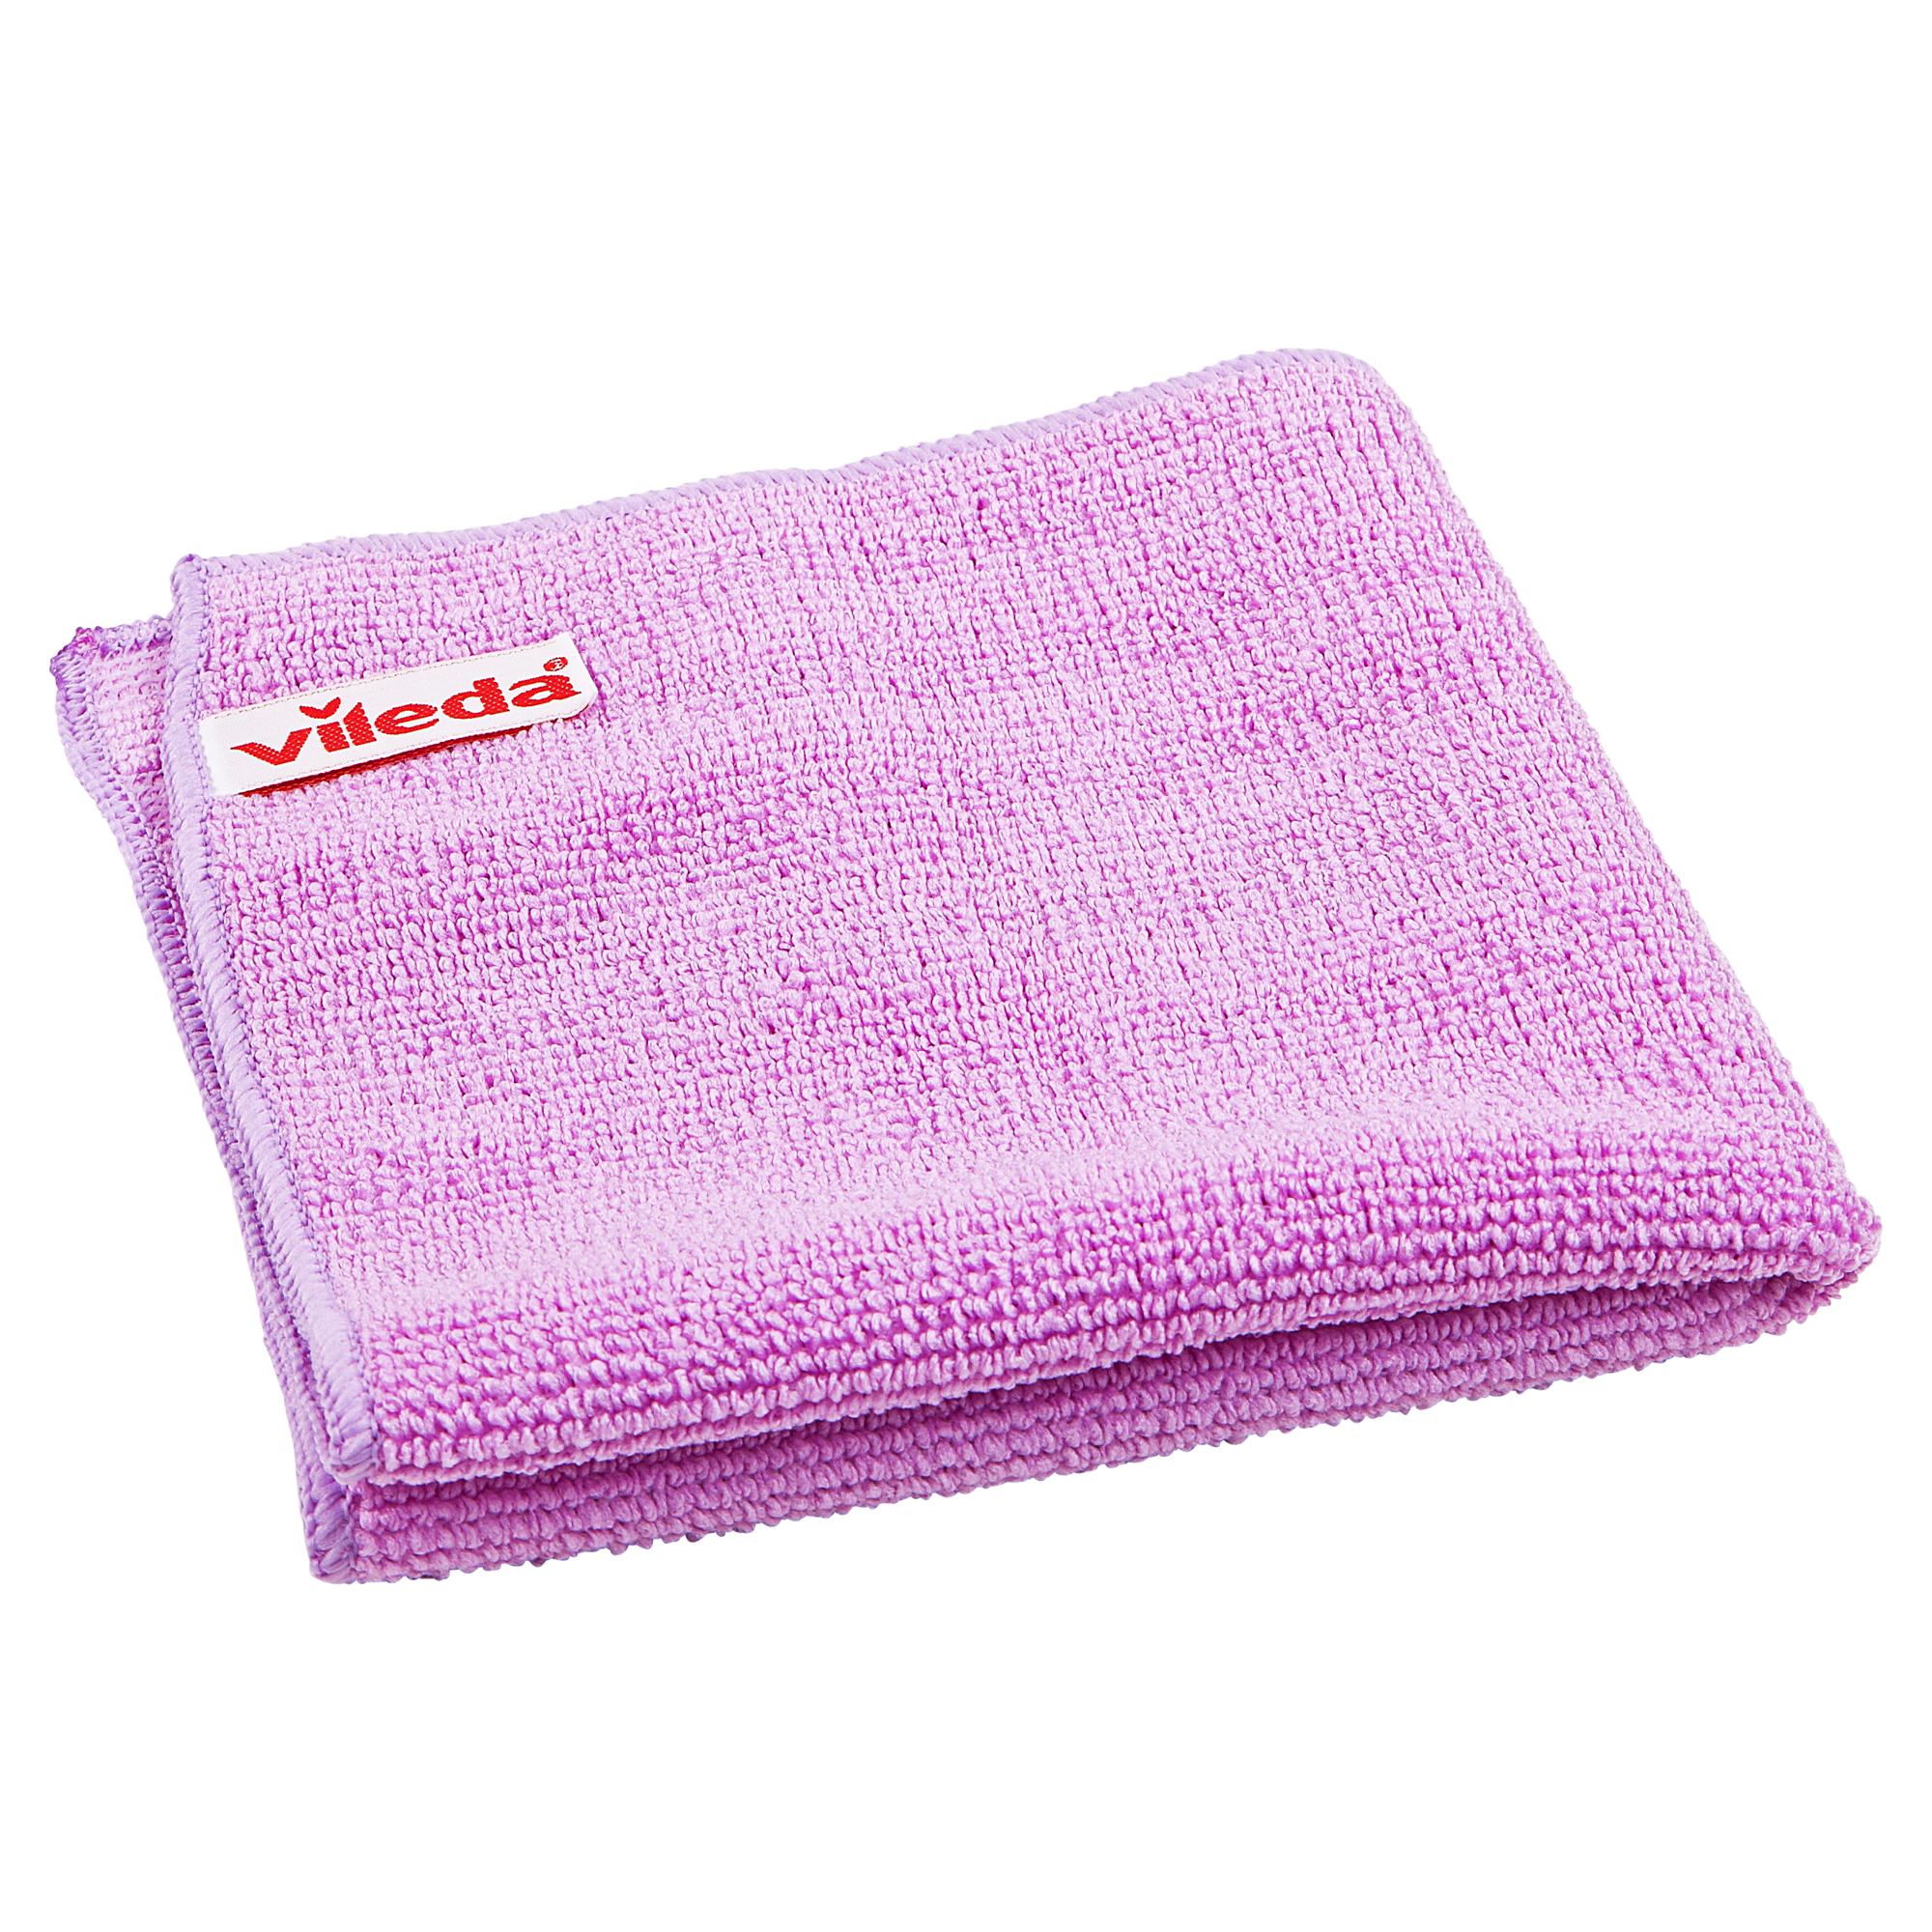 Allzwecktuch "Microfibre" 2in1 + product picture